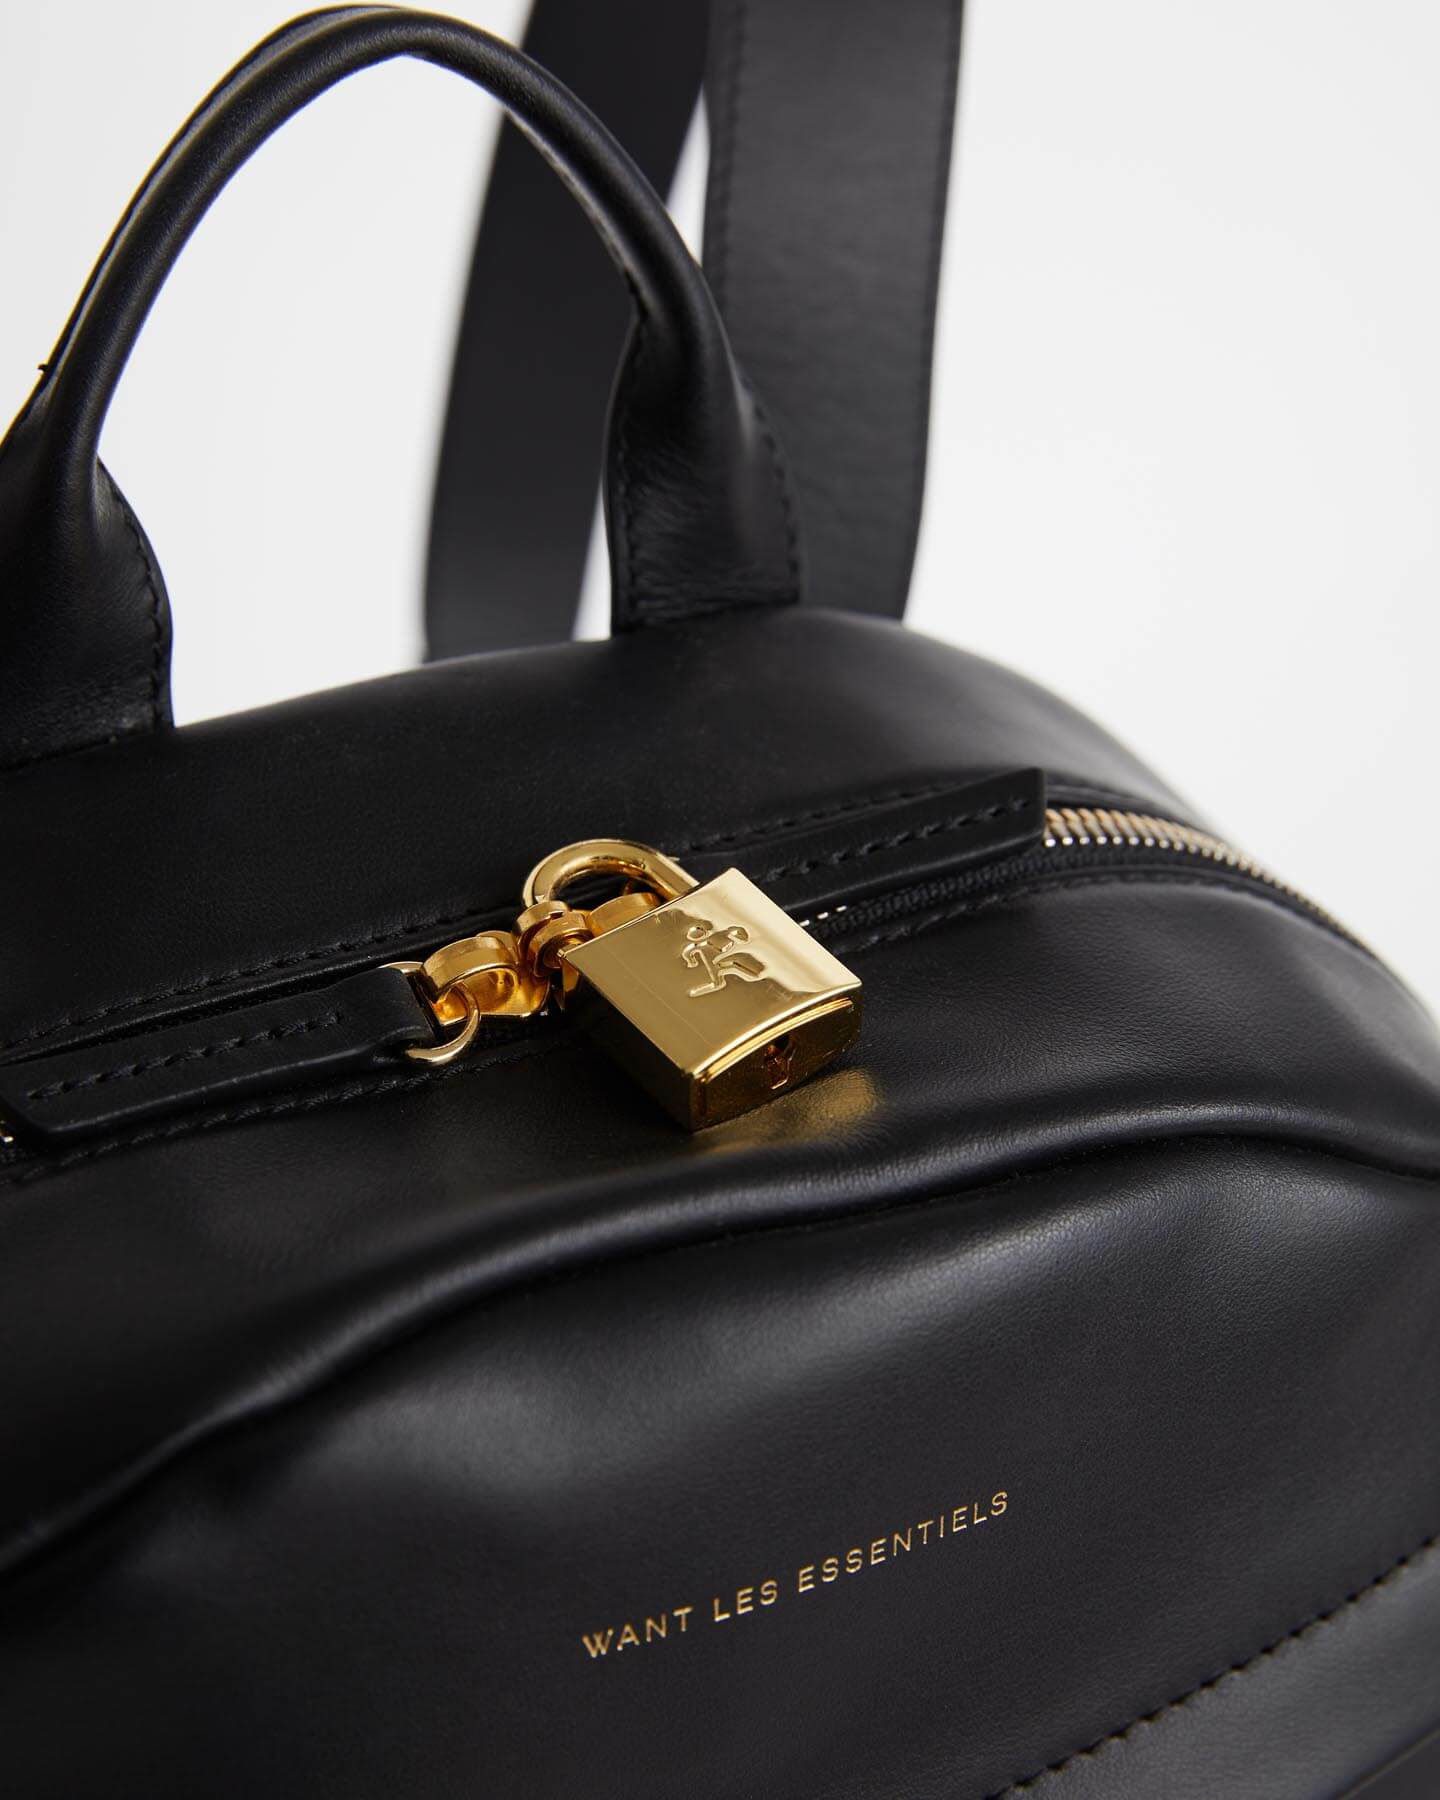 Piper Leather Backpack - WANT Les Essentiels